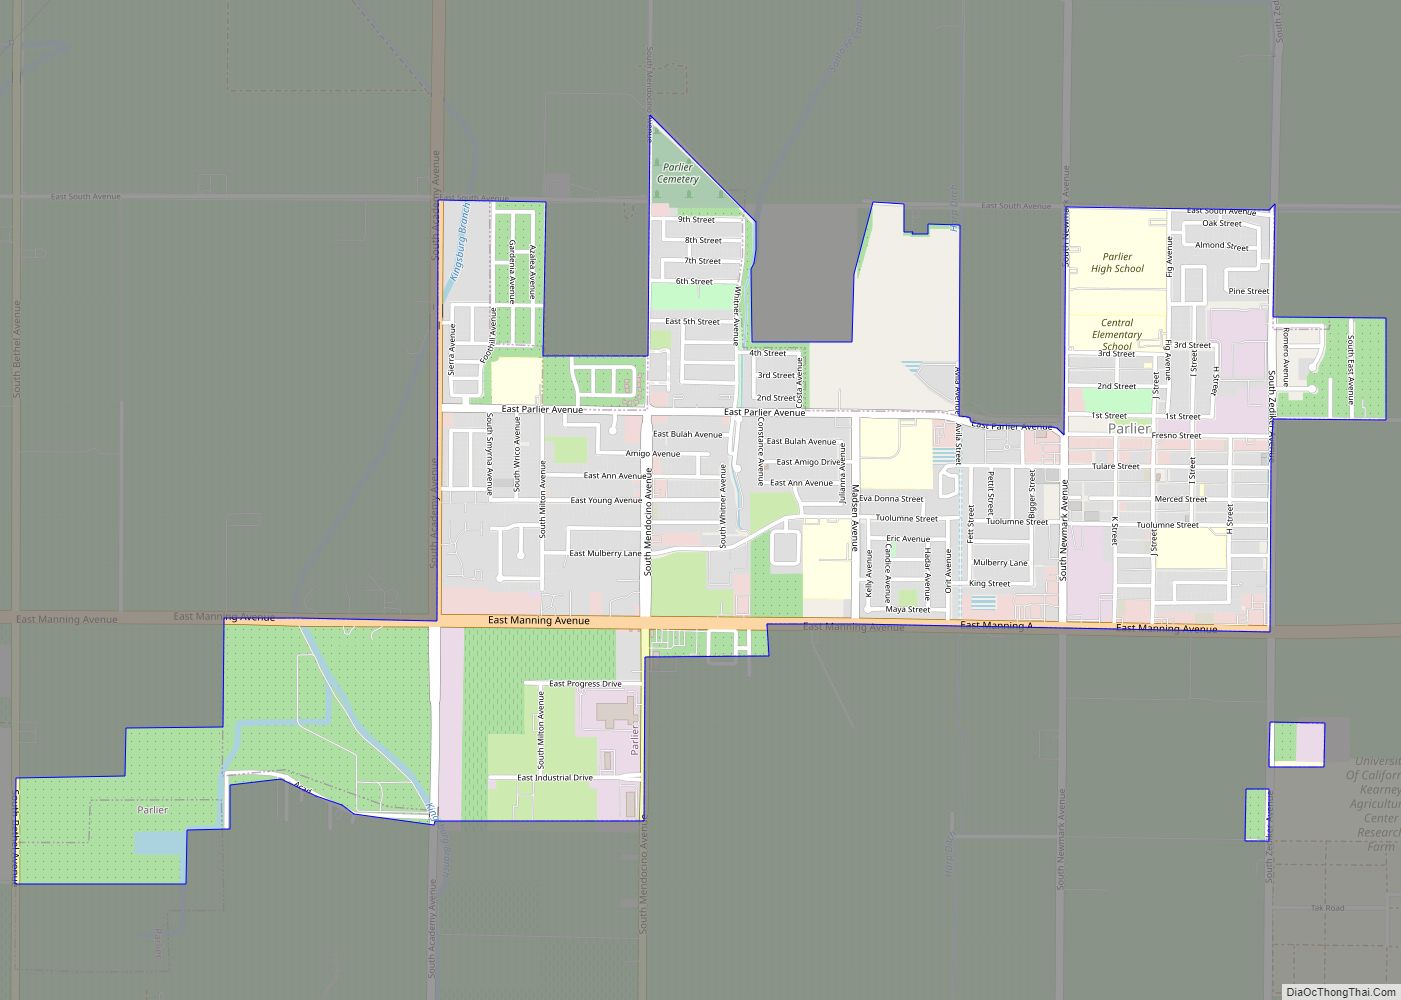 Map of Parlier city